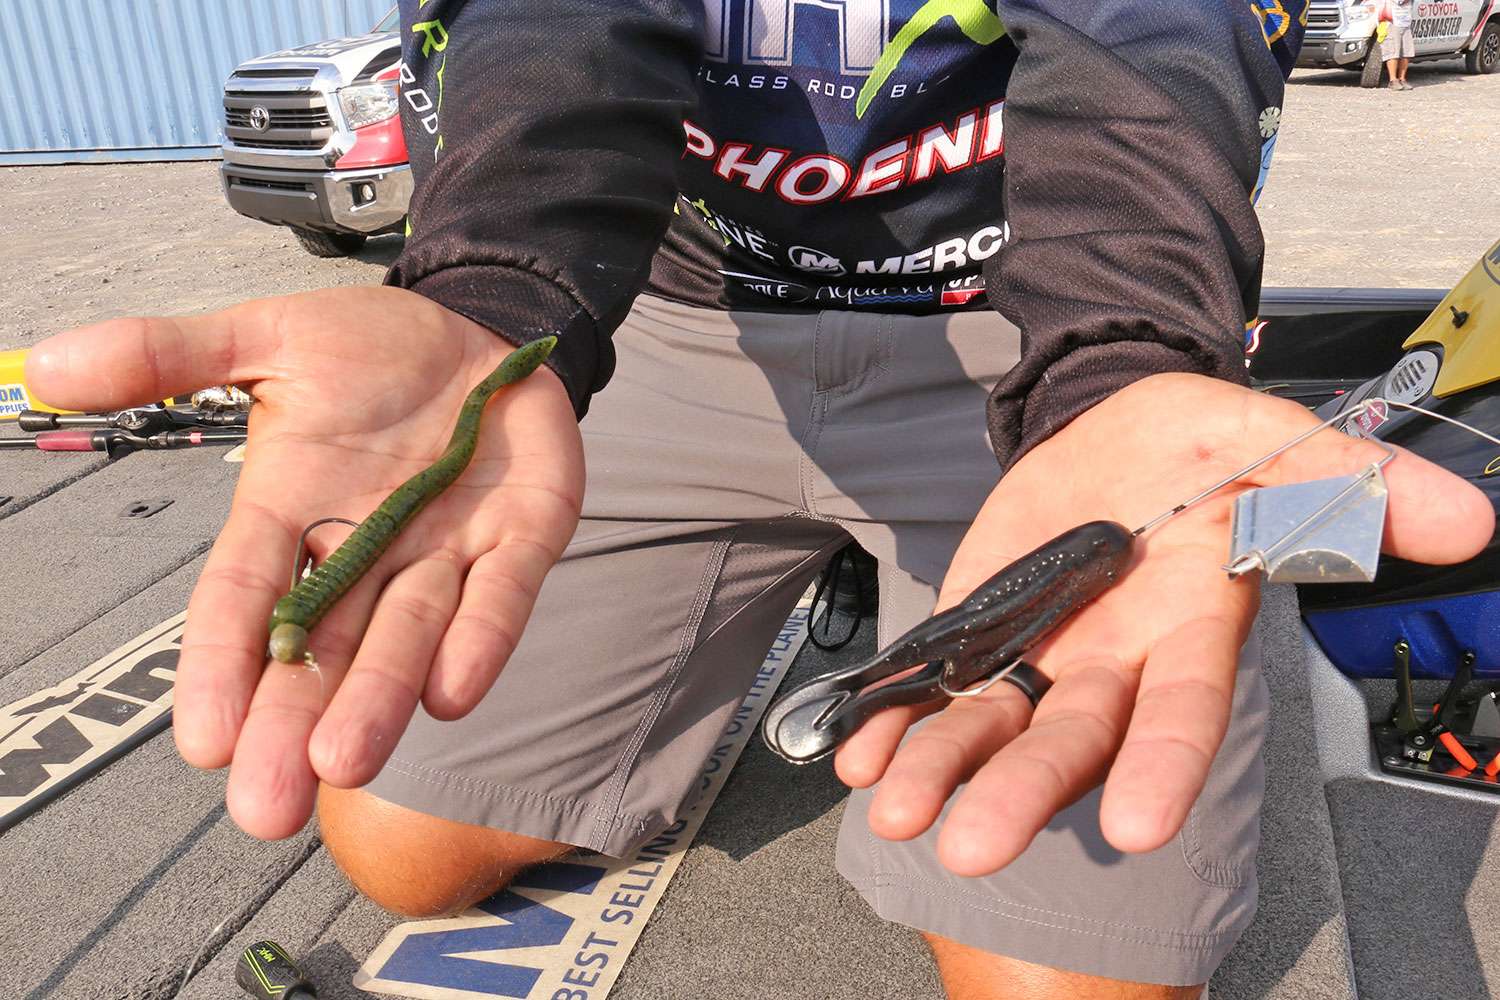 Lester fished a 3/8-ounce buzzbait, removing the skirt and replacing it with a soft plastic frog. Lester also used a 3/16-ounce shaky head jig with a 6-inch X Zone Pro Series MB Fat Finesse Worm. 